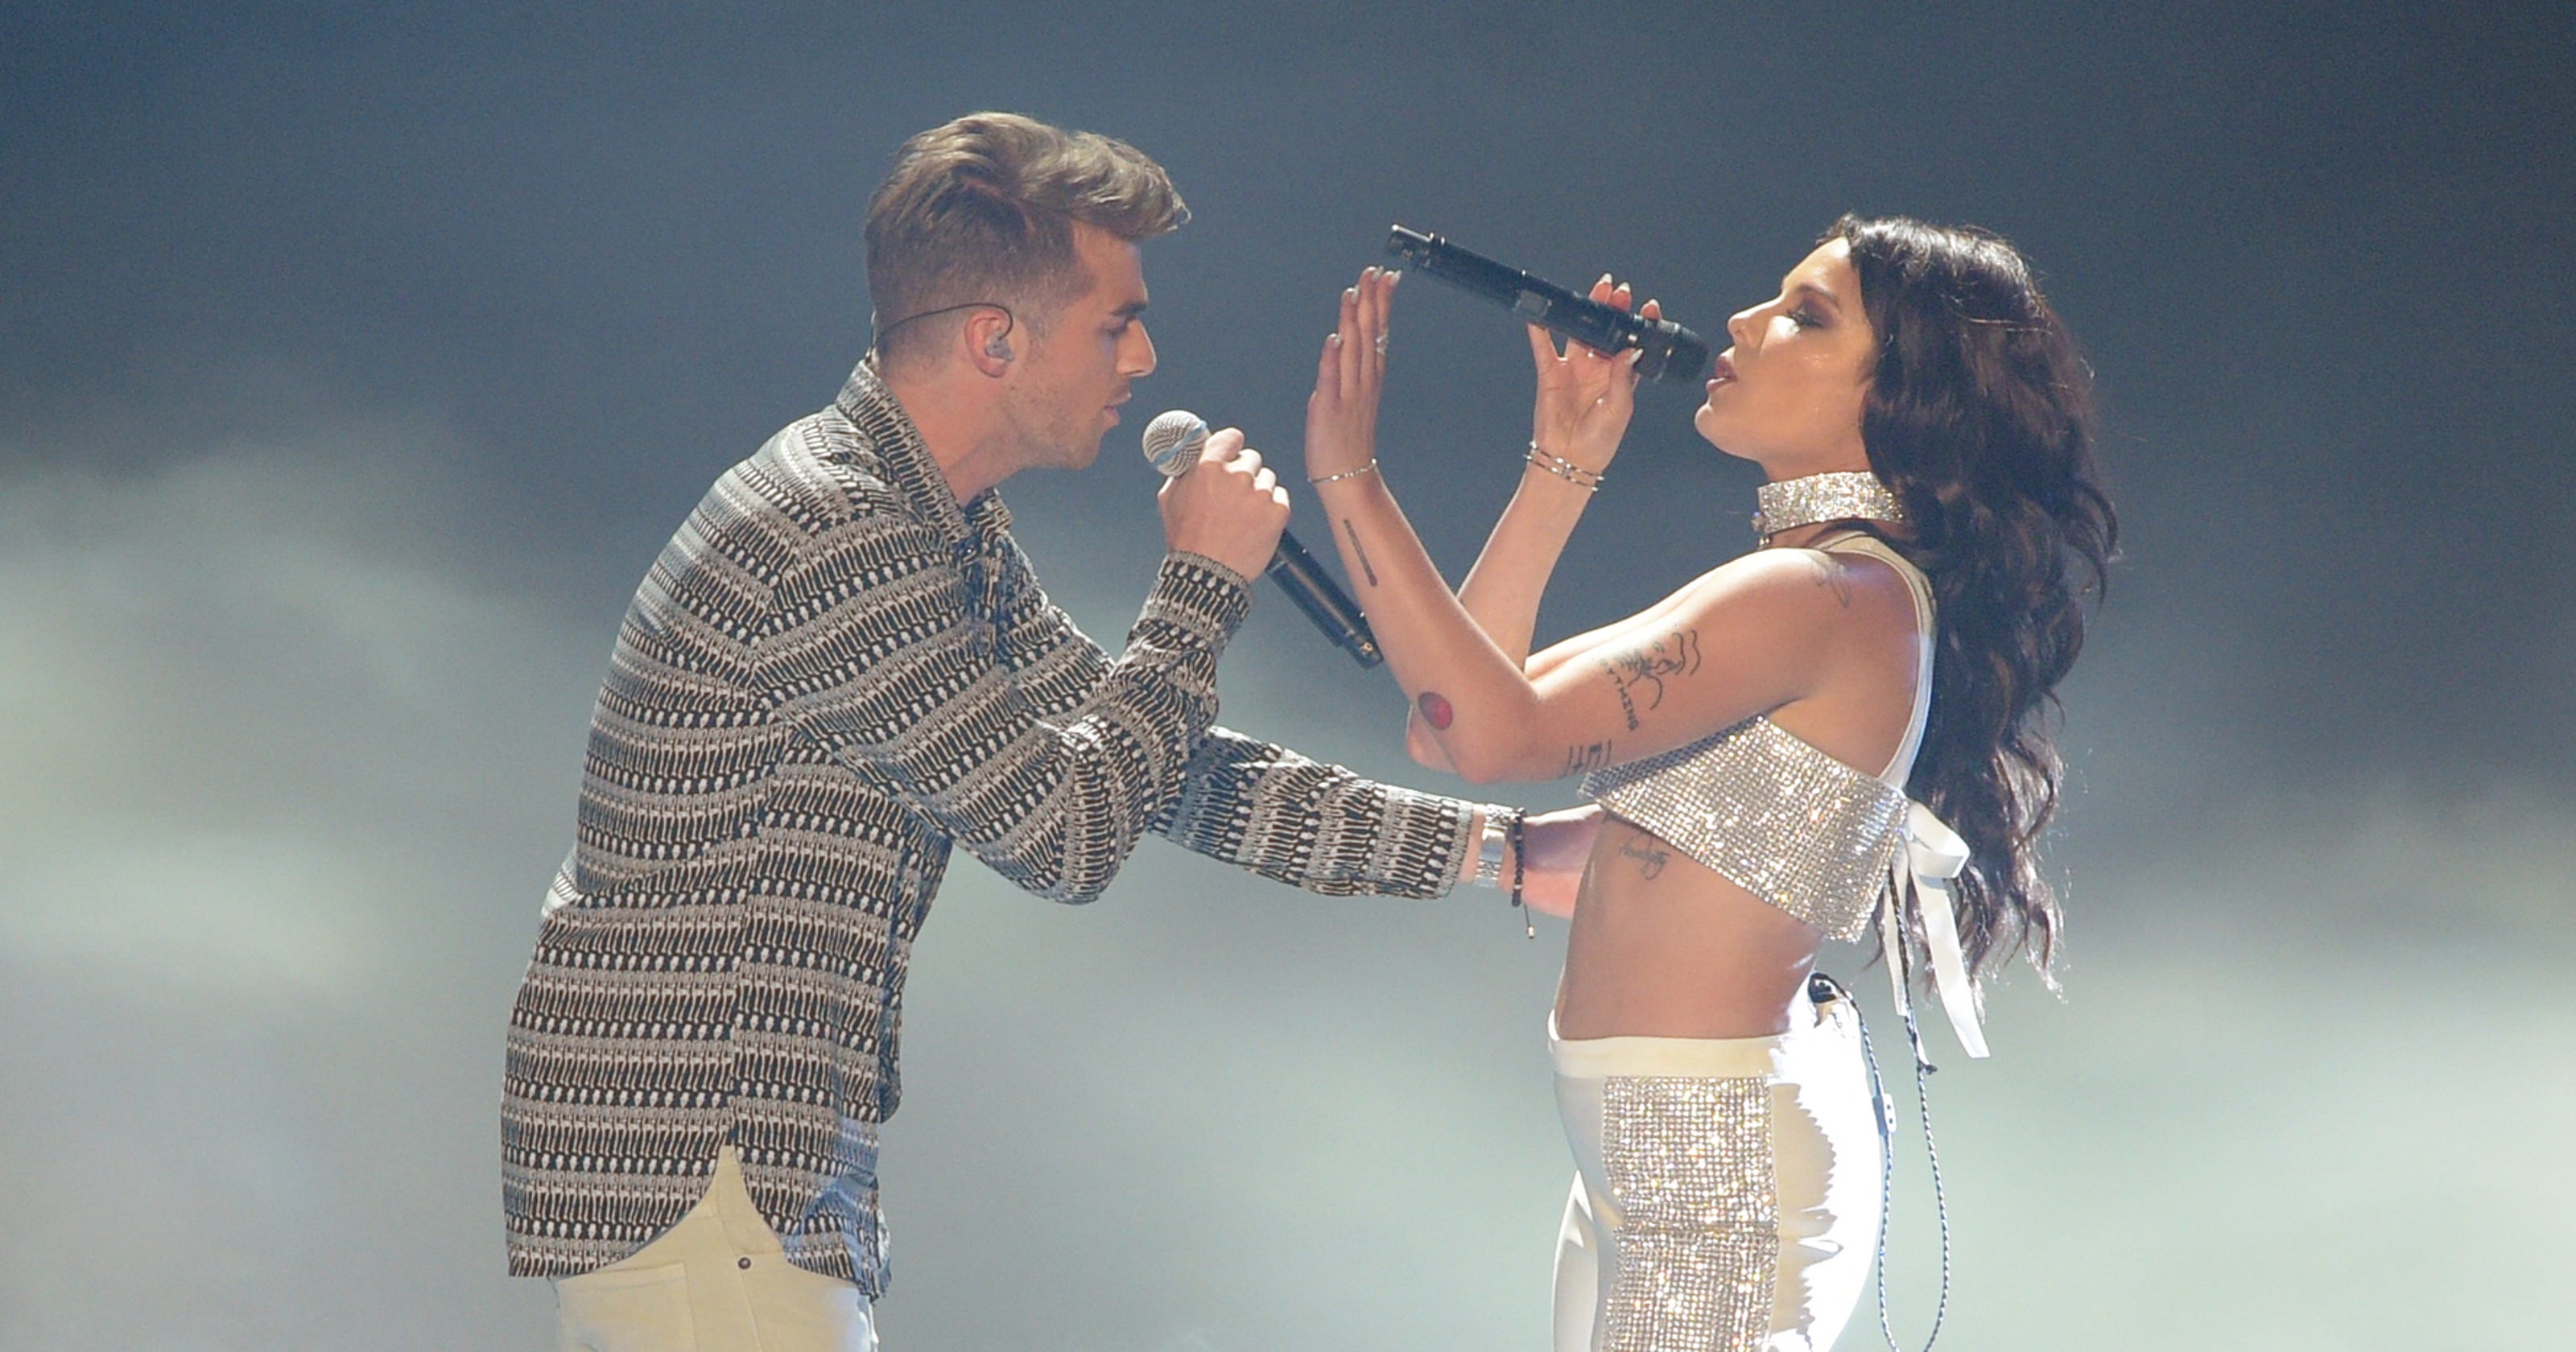 Halsey, Drew Taggart get sexy and 'Closer' in The Chainsmokers' new music video3200 x 1680